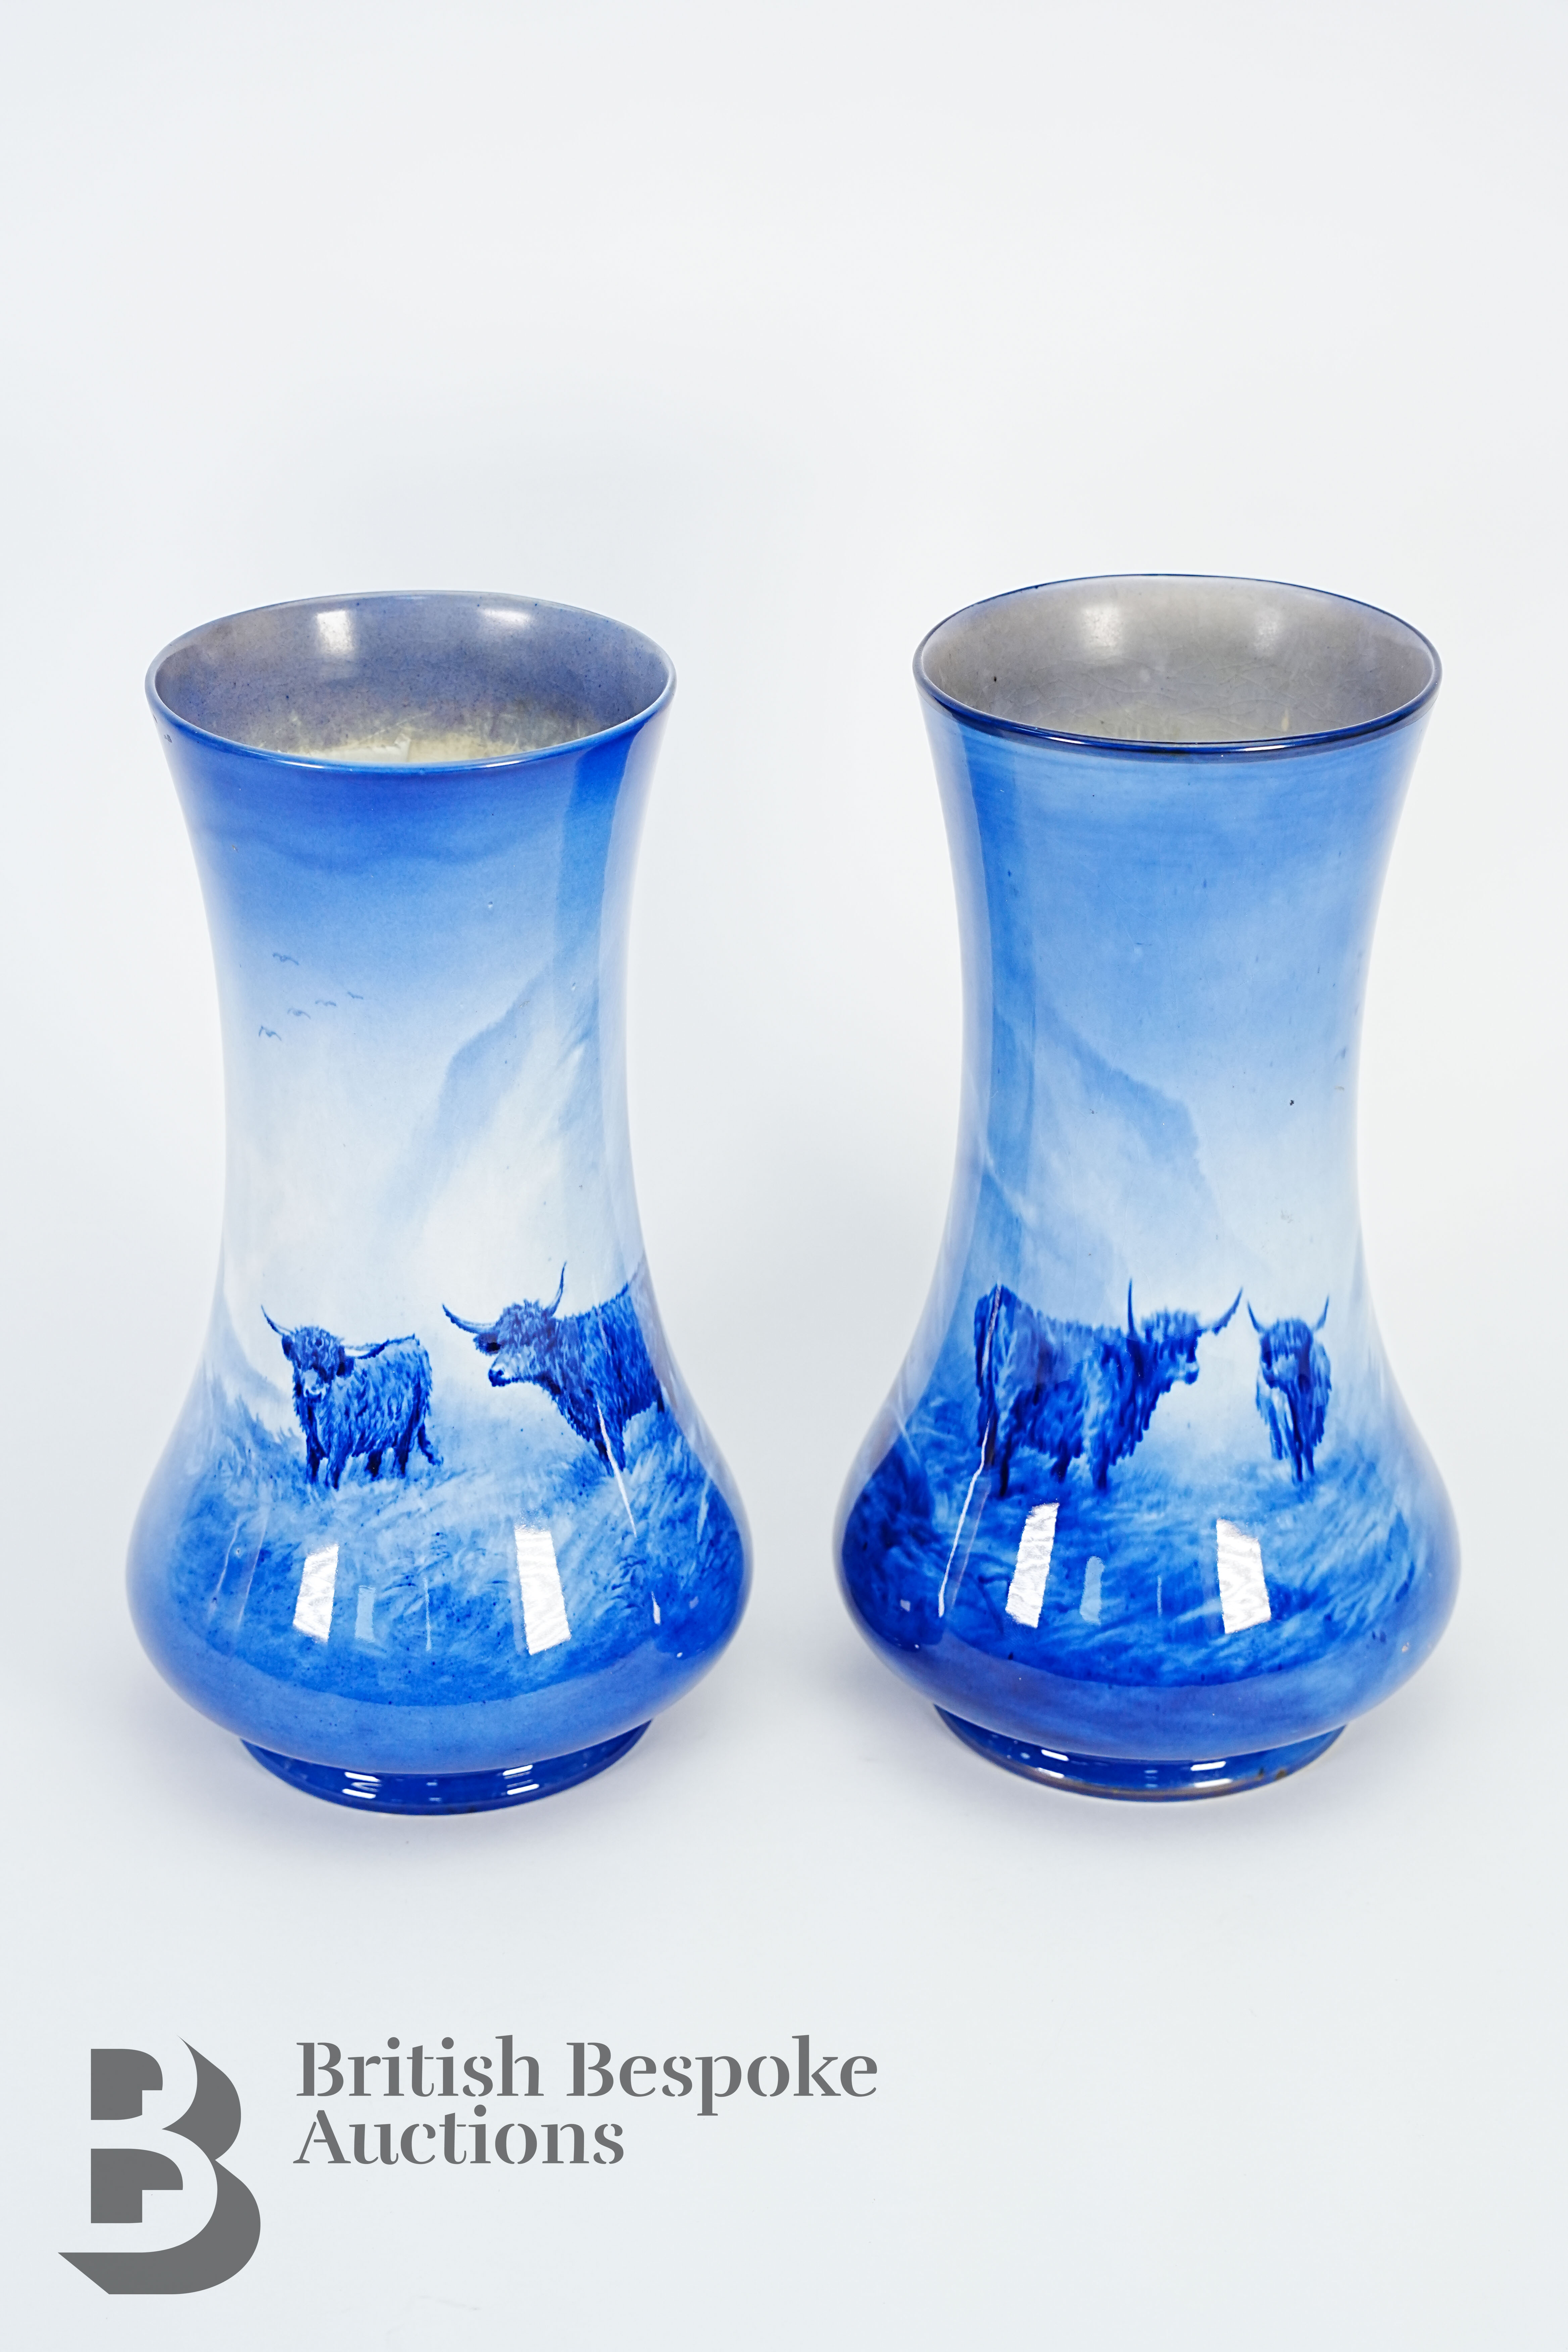 Two Pairs of Crown Devon Vases - Highland Cows - Image 4 of 8